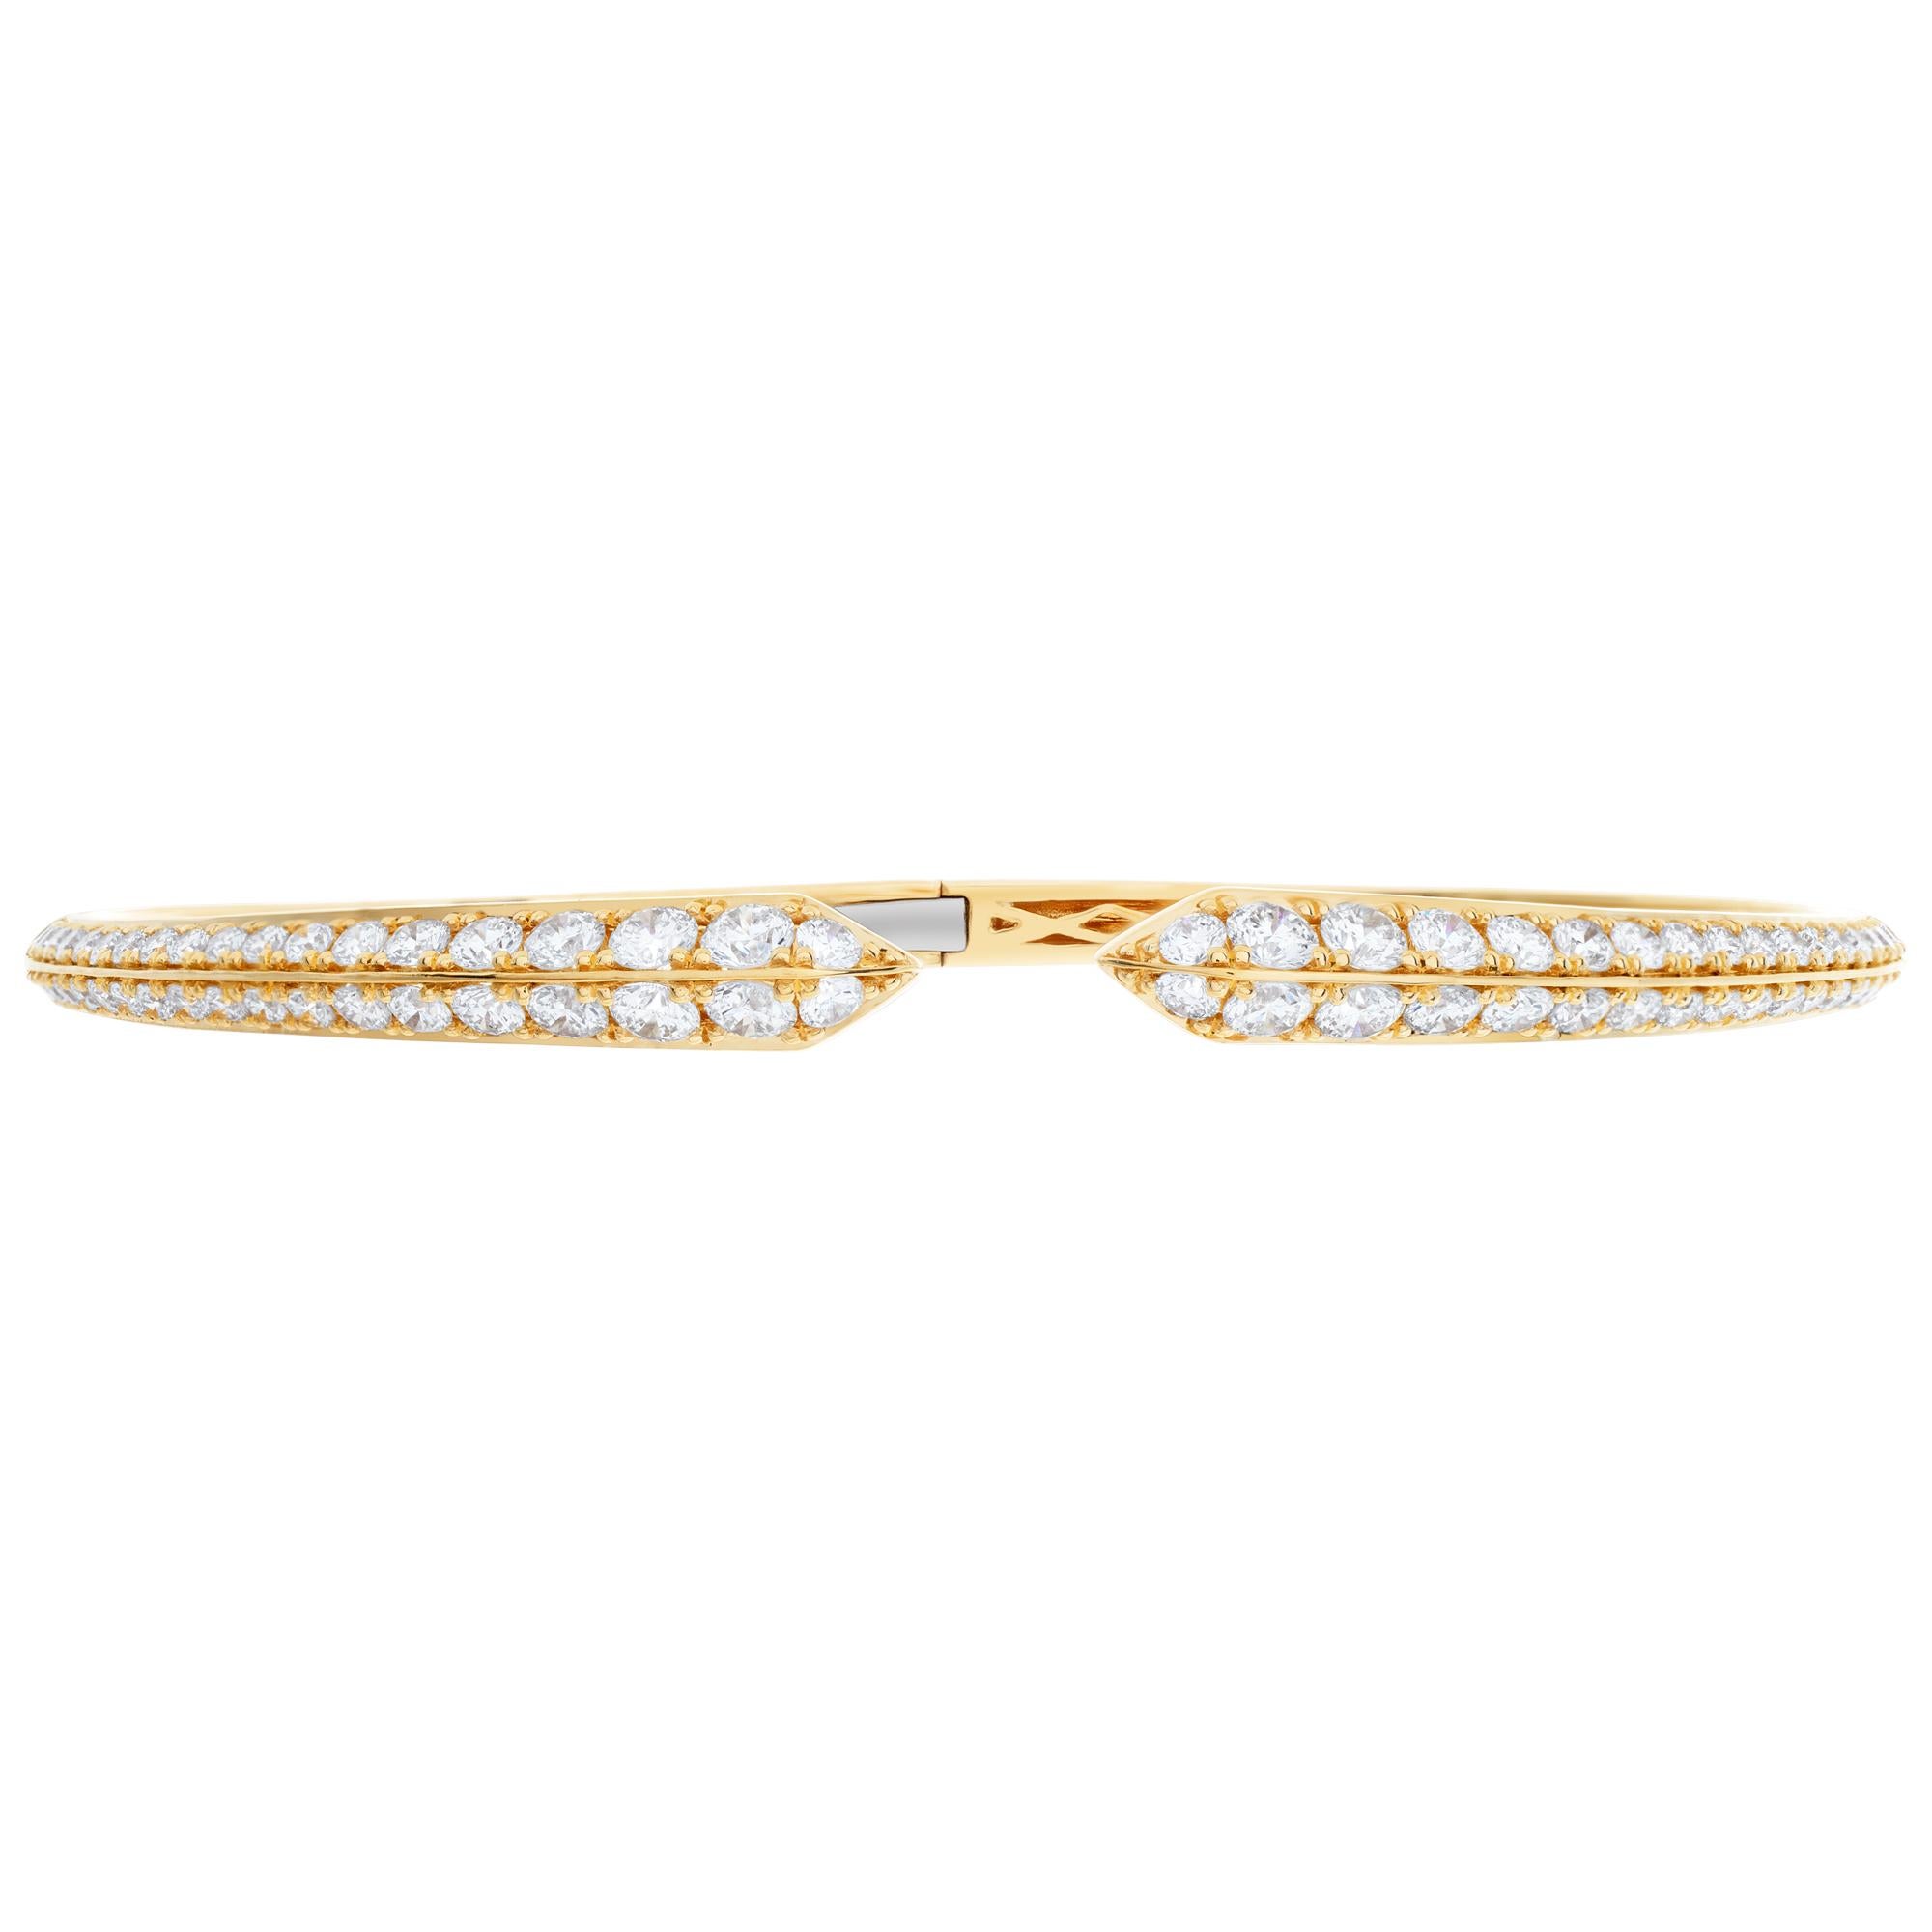 Stunning 18k hinged yellow gold bangle with 2.35 carats in G-H color, VS-SI clarity diamonds. Fits up to 7.5'' wrist
